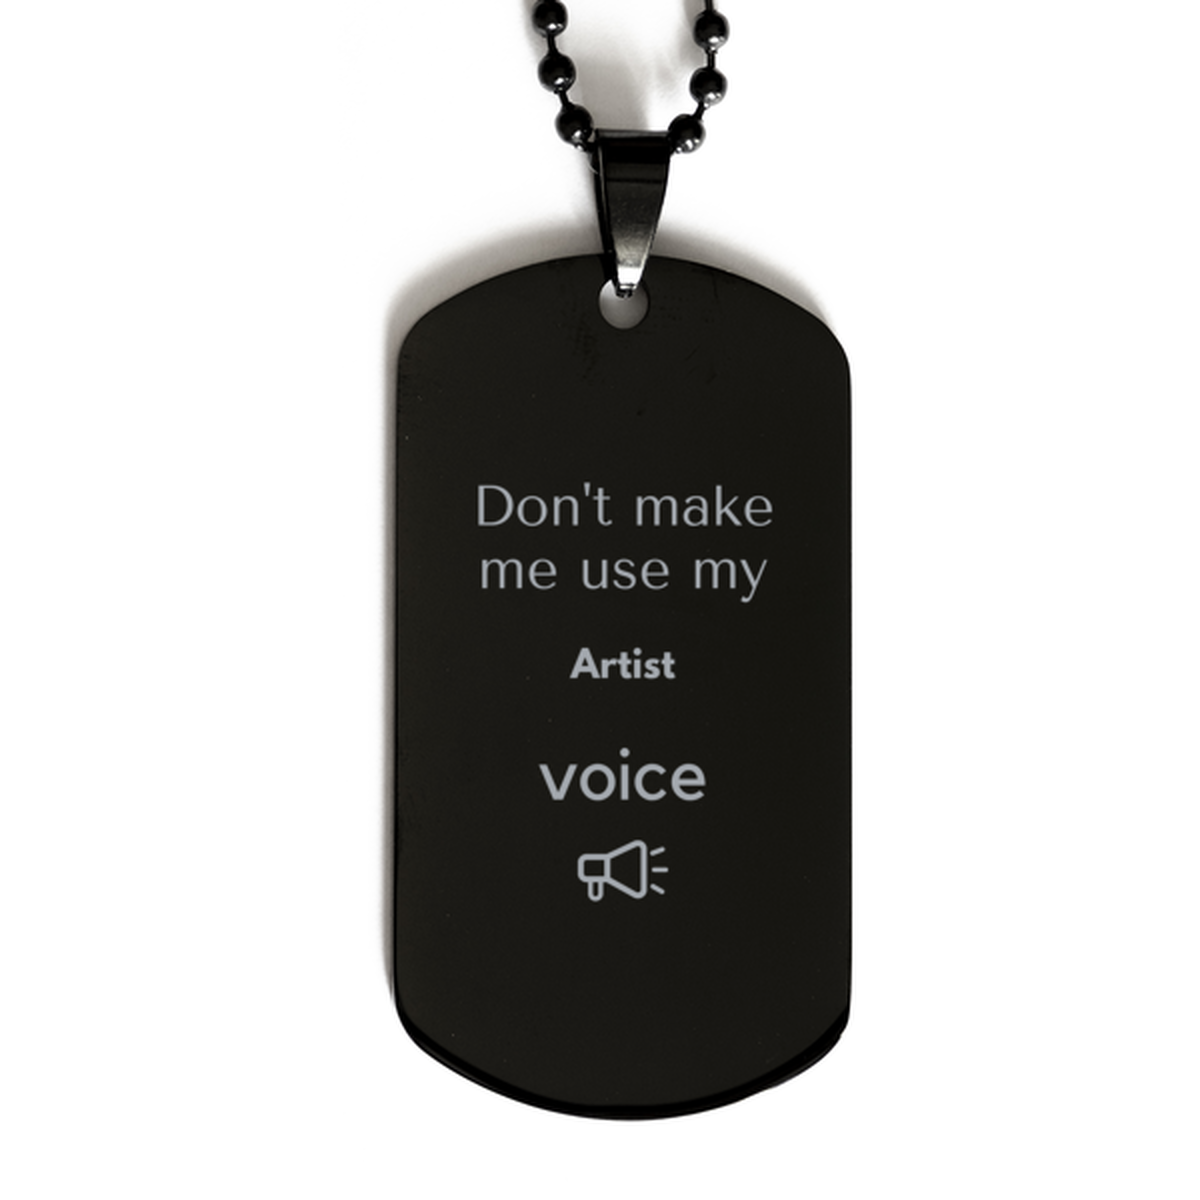 Don't make me use my Artist voice, Sarcasm Artist Gifts, Christmas Artist Black Dog Tag Birthday Unique Gifts For Artist Coworkers, Men, Women, Colleague, Friends